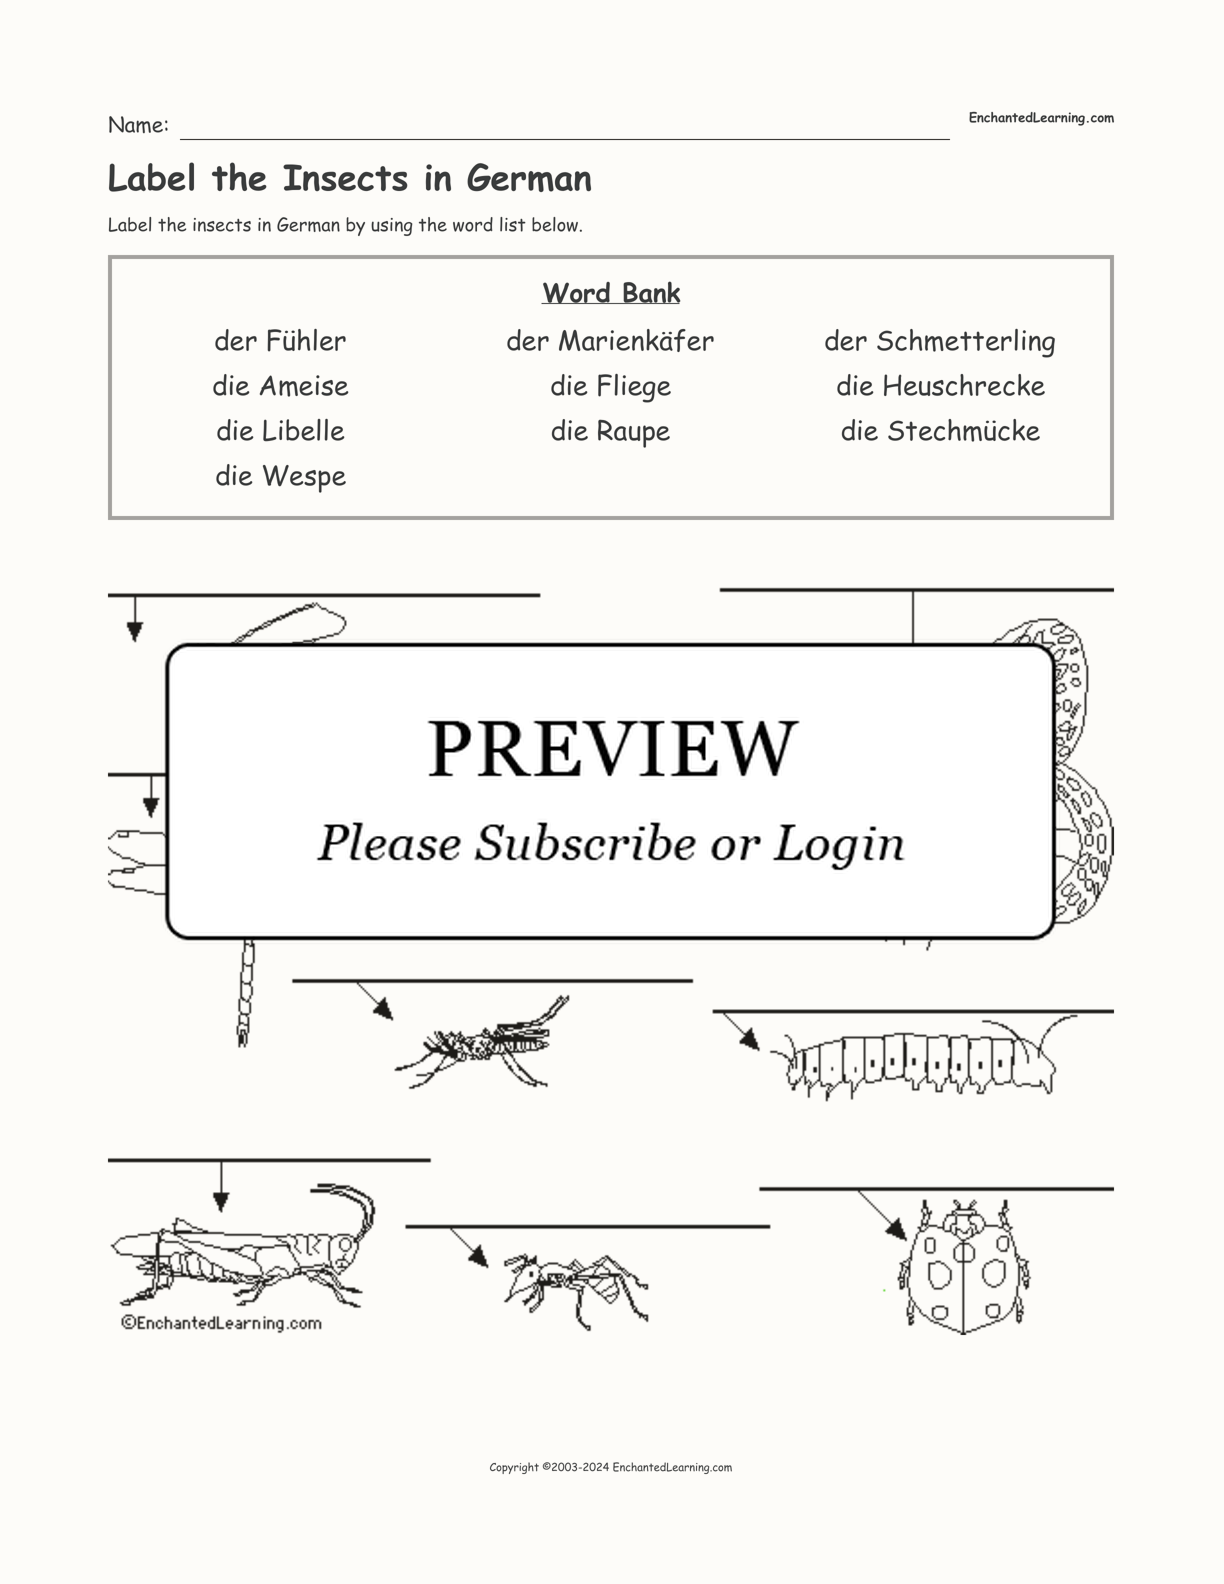 Label the Insects in German interactive worksheet page 1